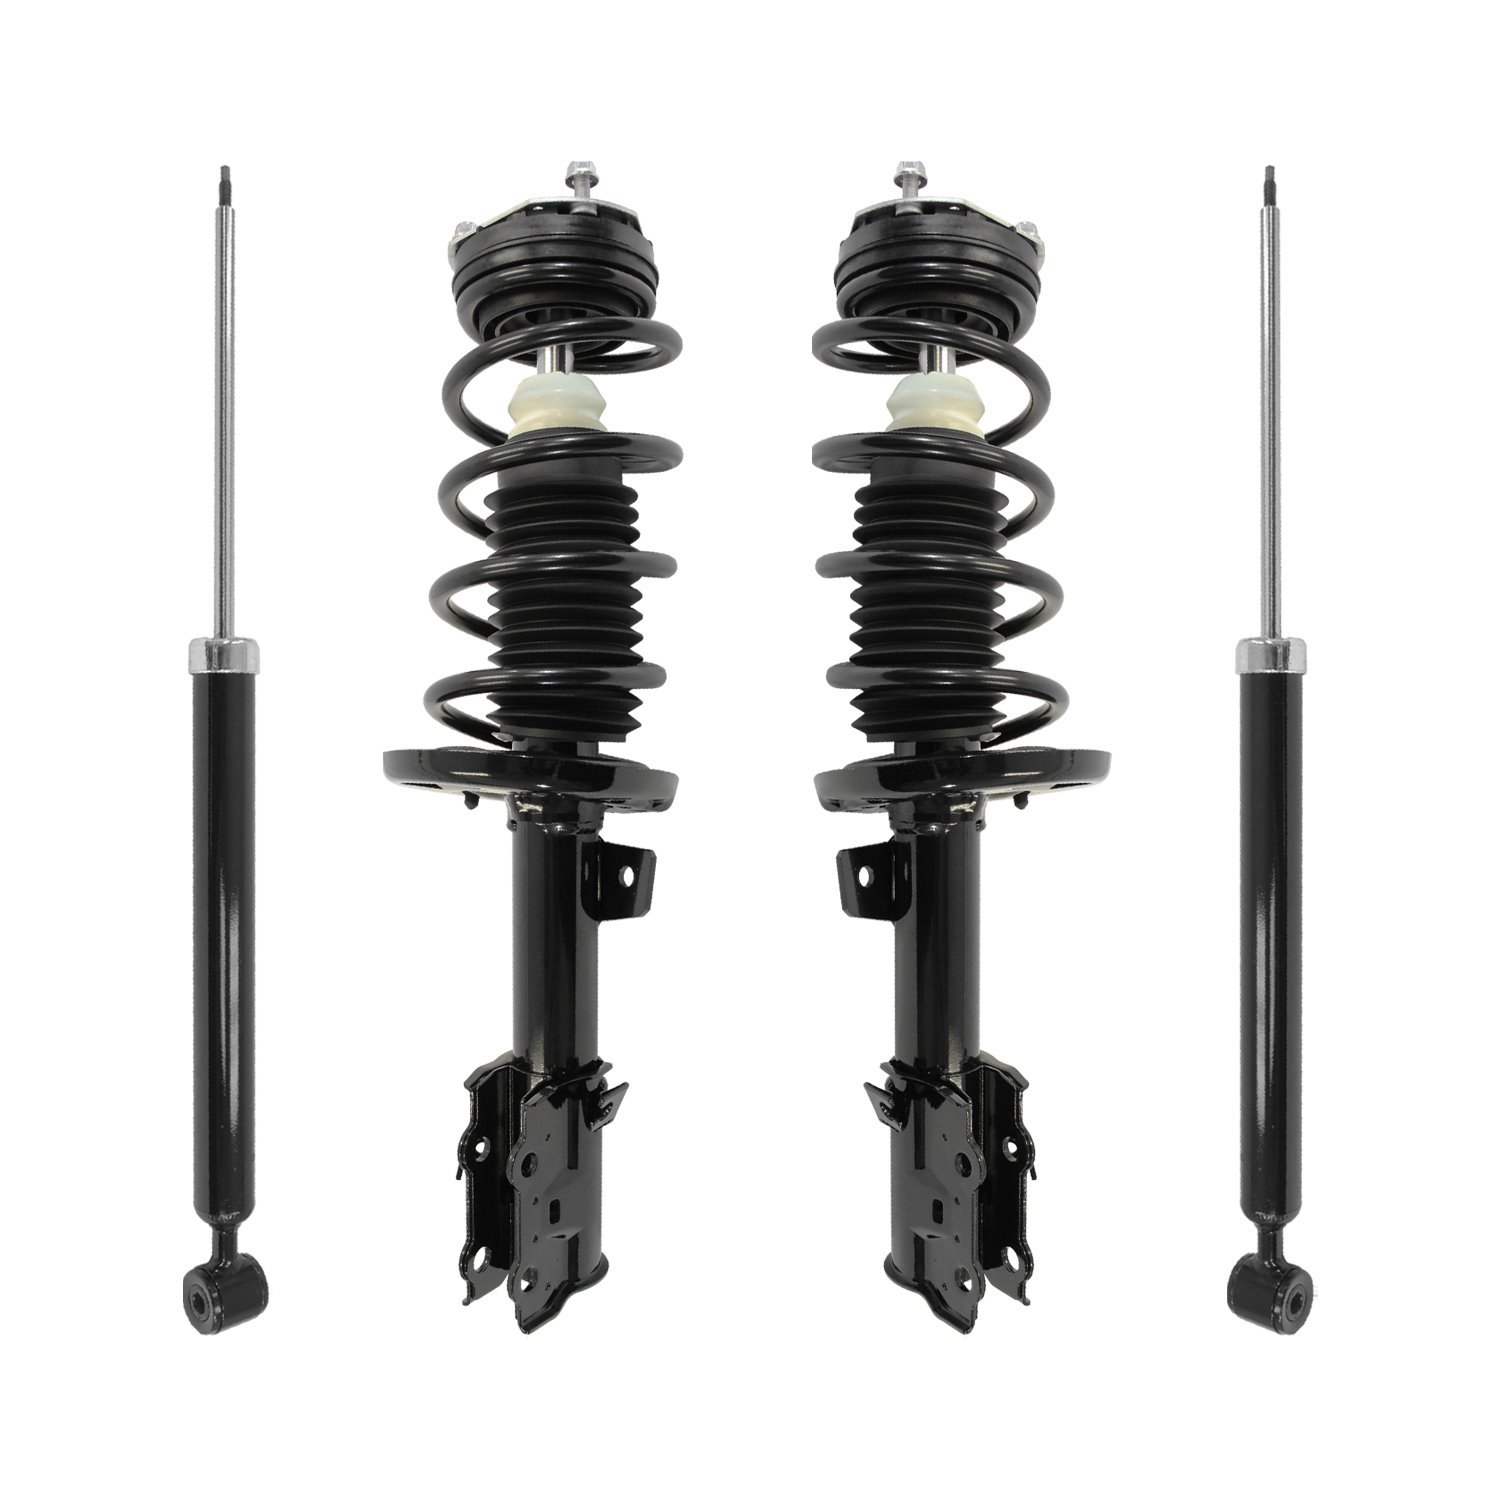 4-11947-252140-001 Front & Rear Suspension Strut & Coil Spring Assembly Fits Select Ford Fiesta